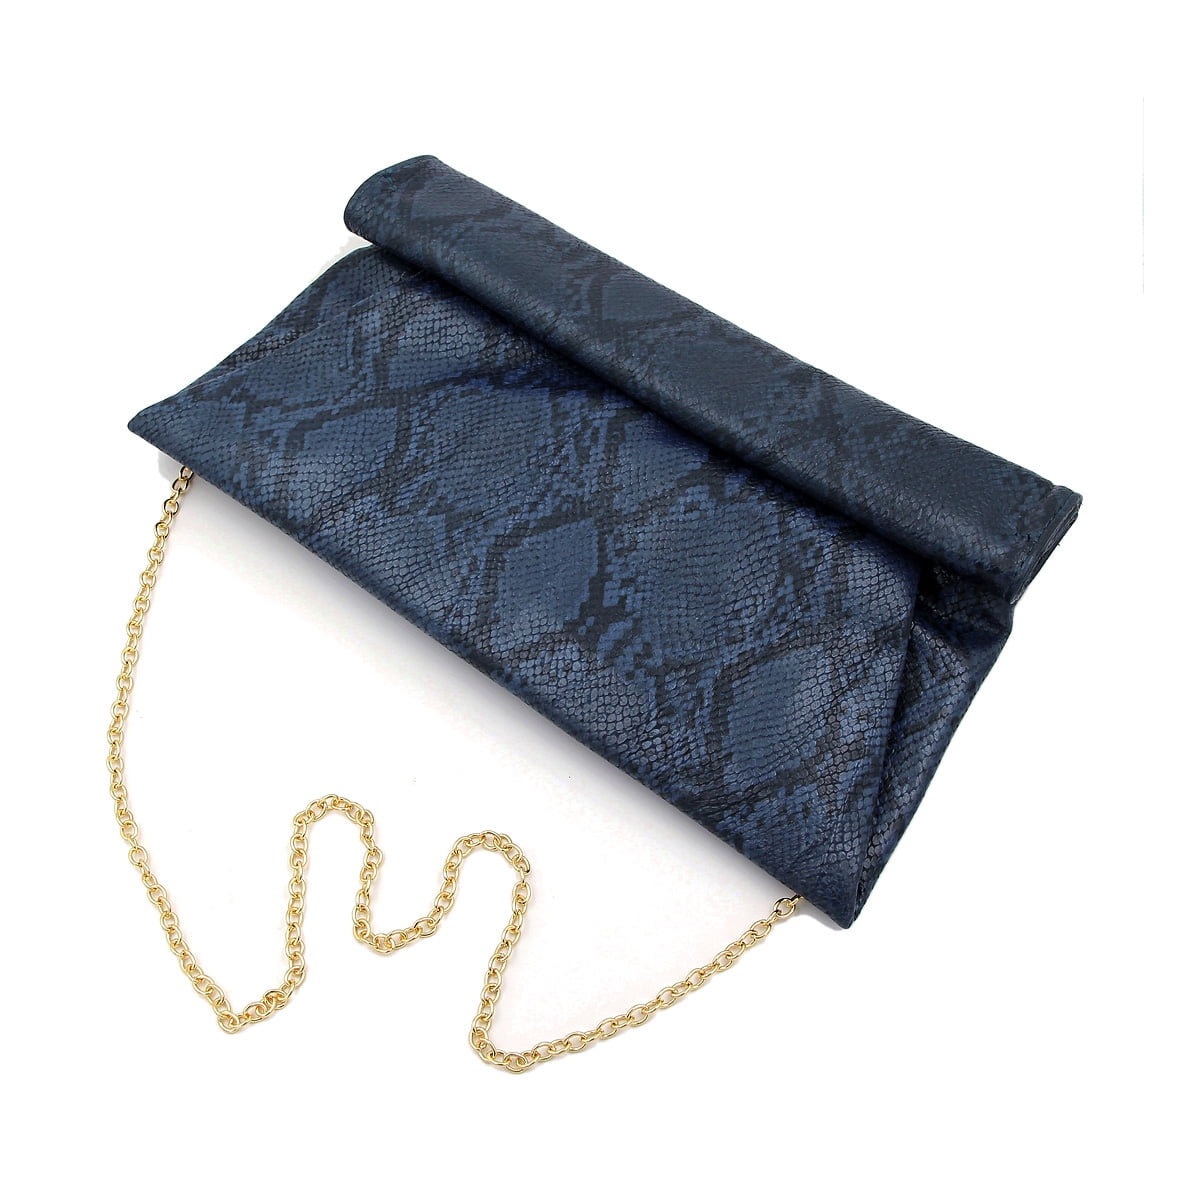 OVER SIZED  MUSTARD & NAVY BLUE asymmetrical faux leather UK lined clutch bag 